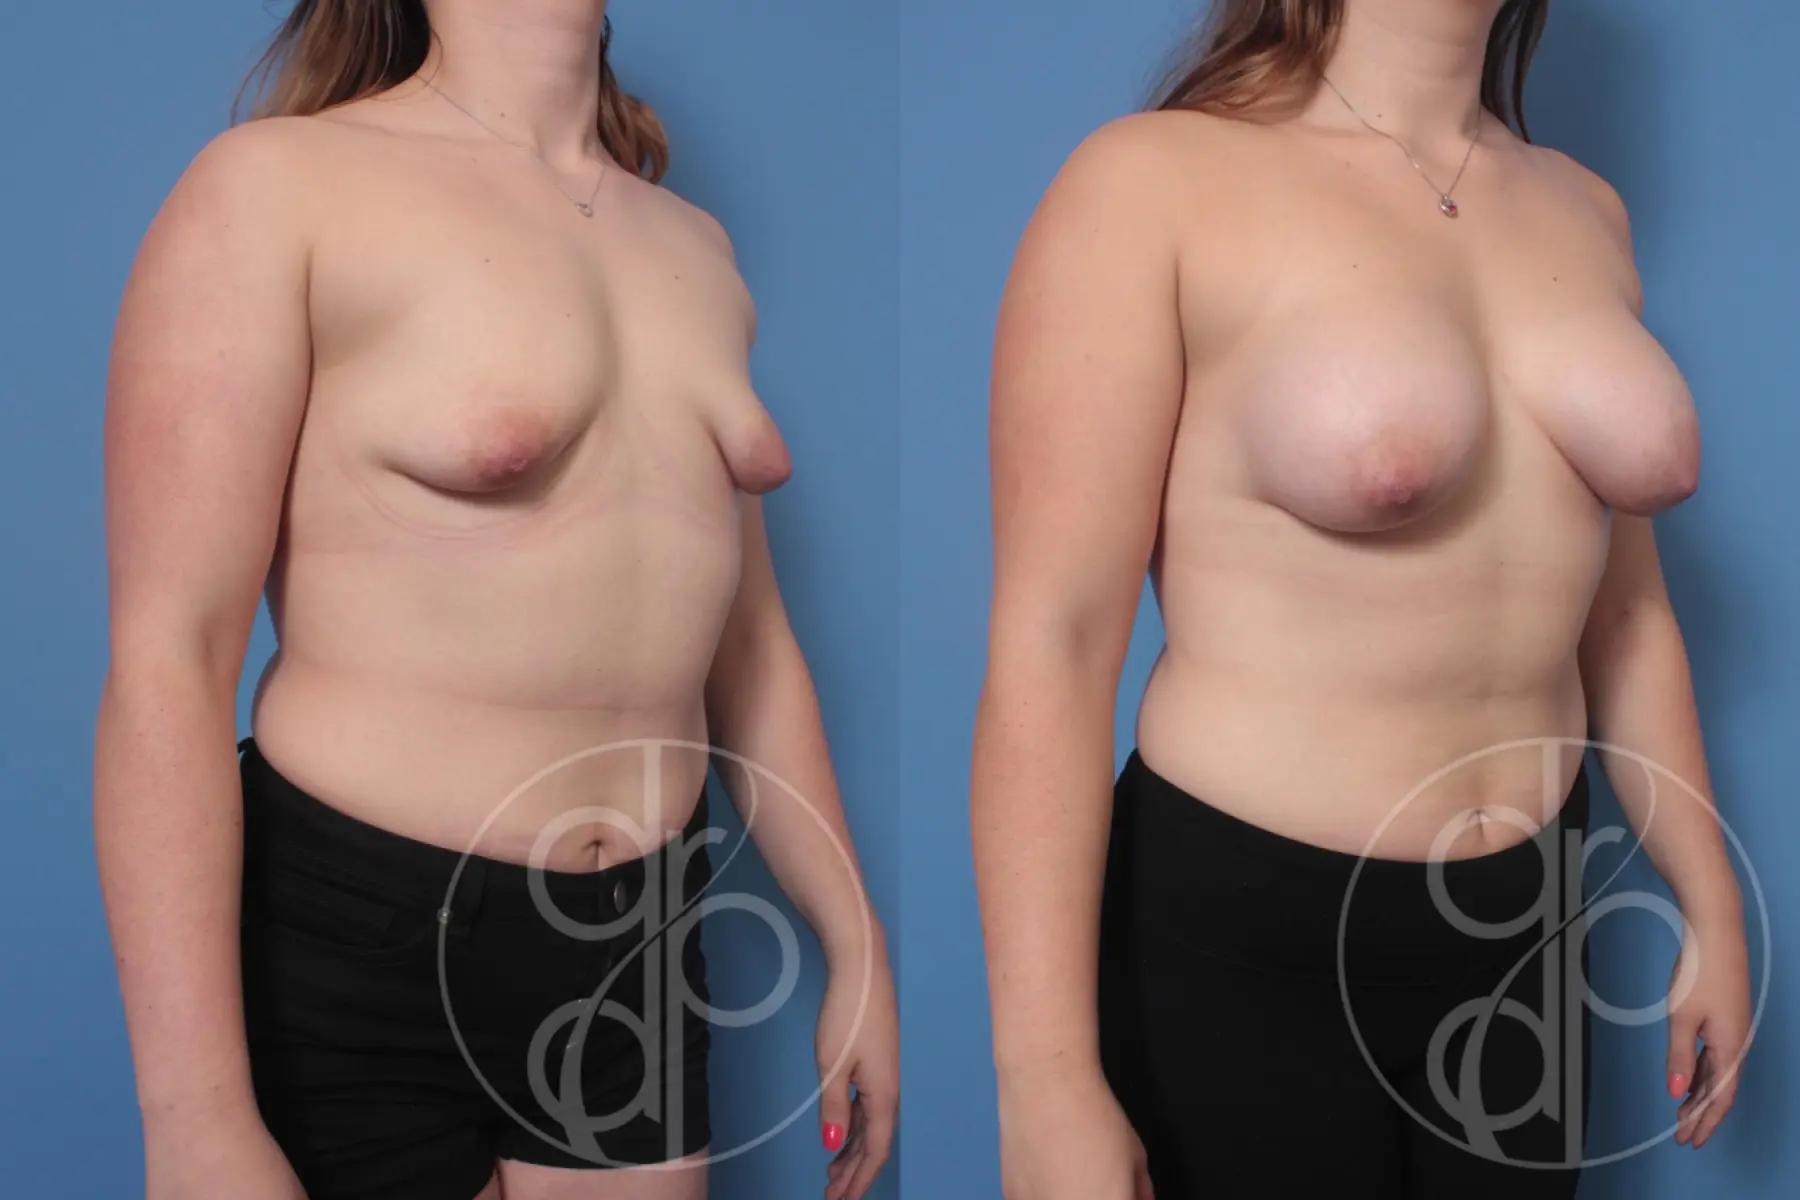 patient 10234 breast augmentation before and after result - Before and After 3